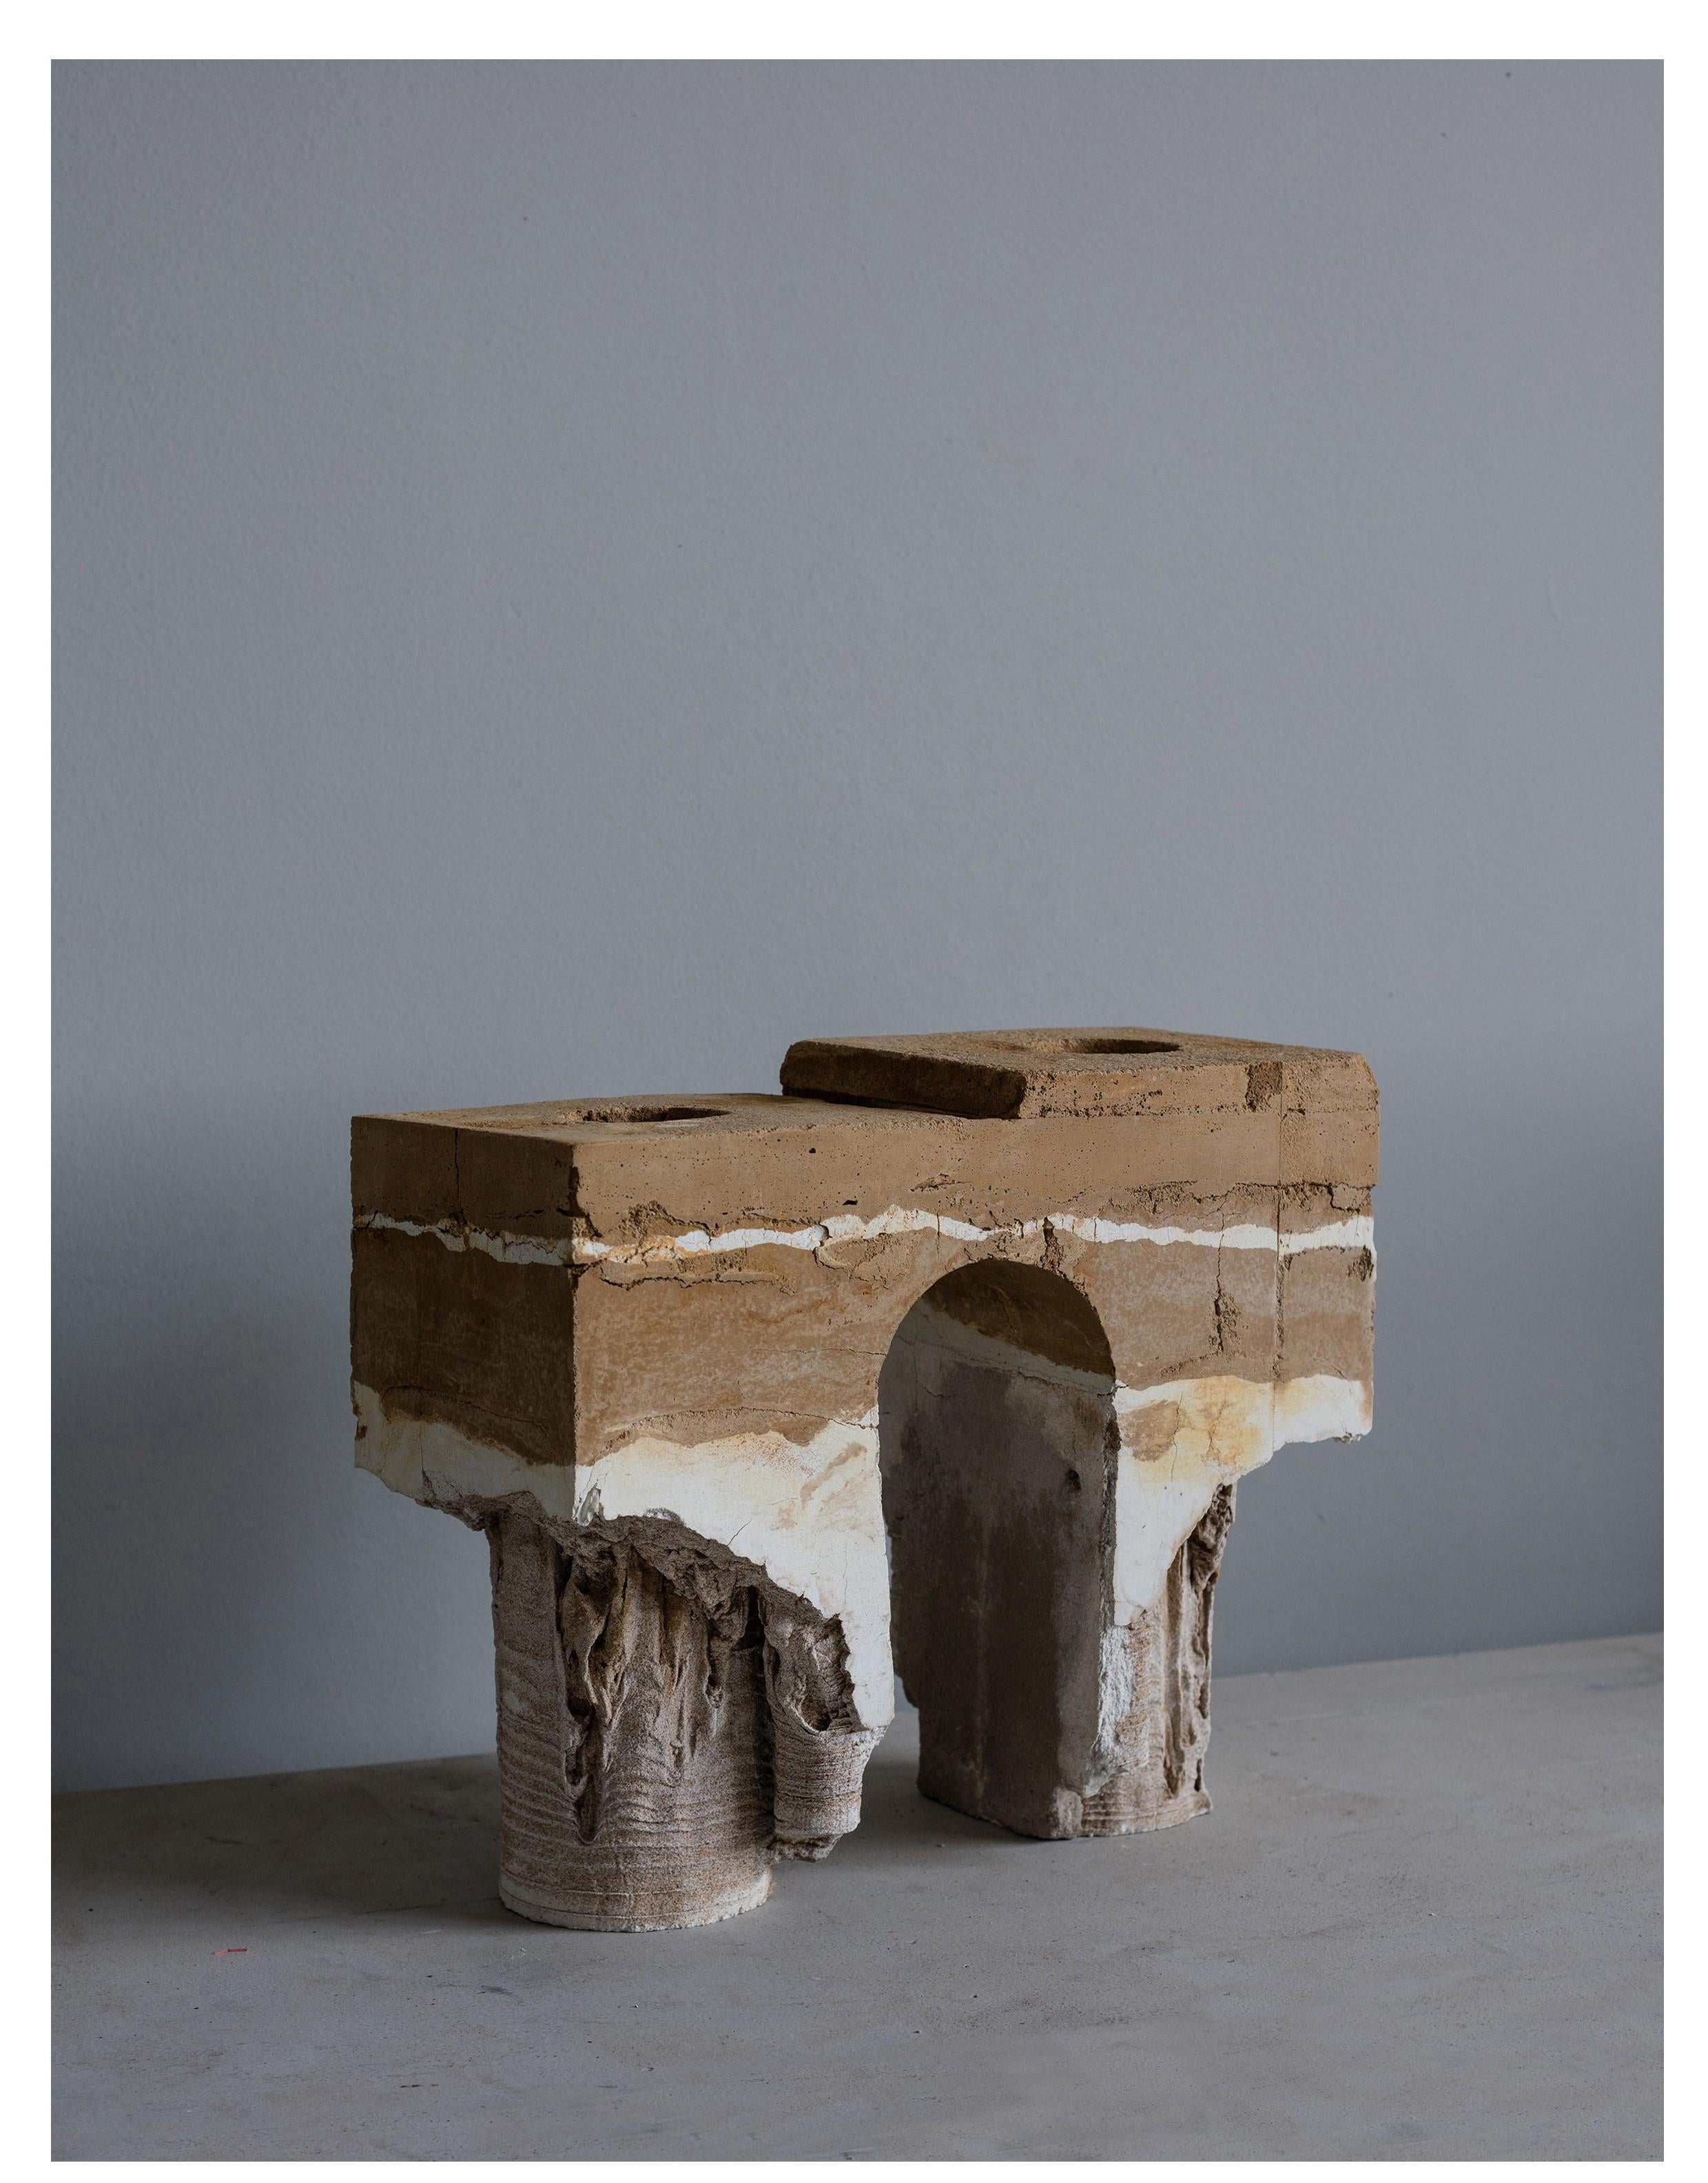 Geomorphic vase by Christian Zahr
Dimensions: W 35 x D 15 x H 30 cm
Materials: Cement- Sand- Water- Time.

Each piece is handmade.

Geomorphic Archeology: Unearthing the Ephemeral - Indoor primitive landscapes (furniture and objects). Sand